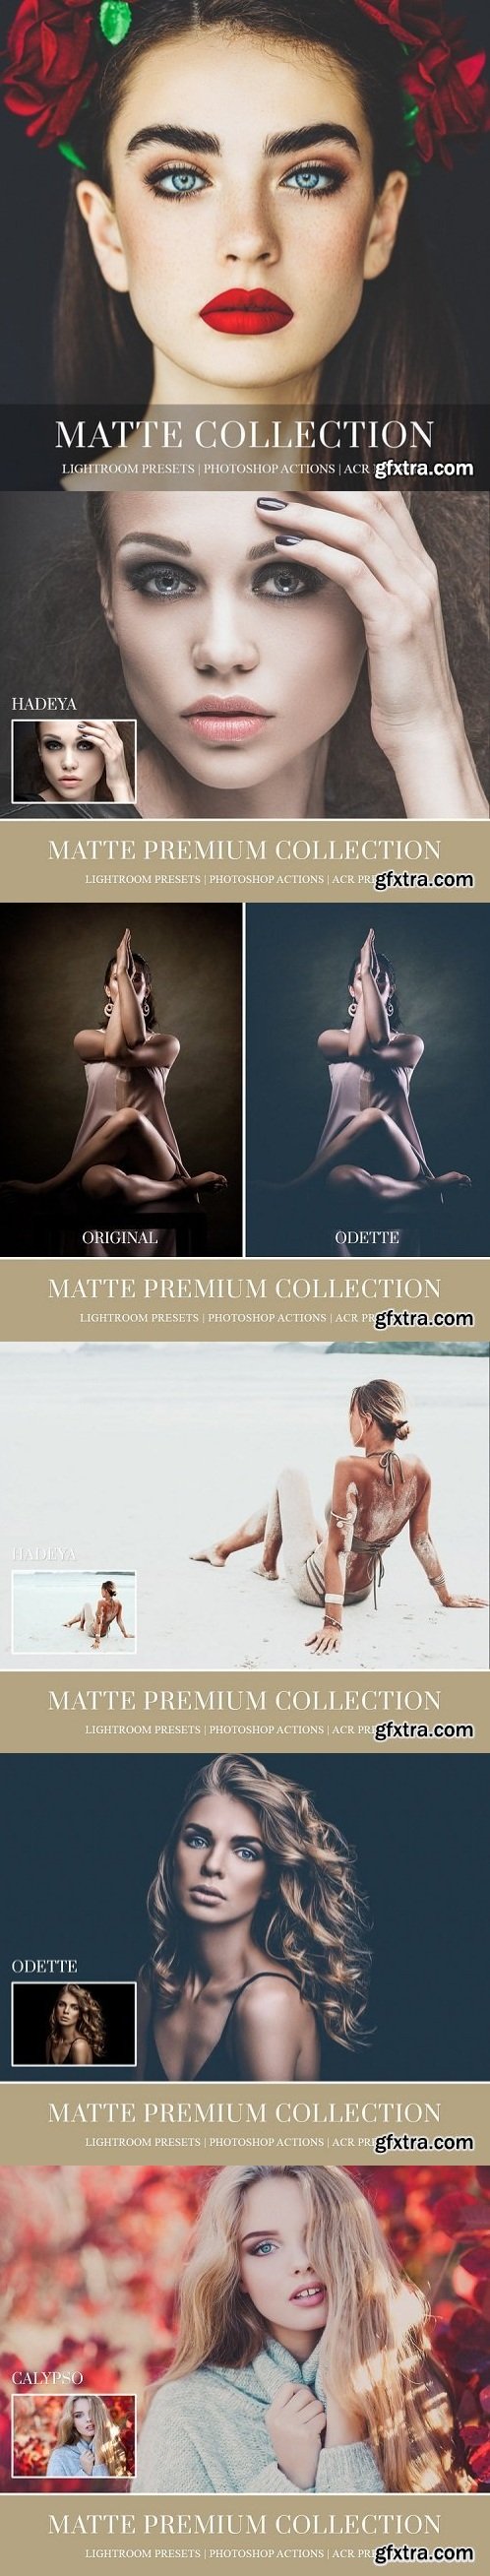 Matte Lightroom Presets, Photoshop Actions and ACR Presets